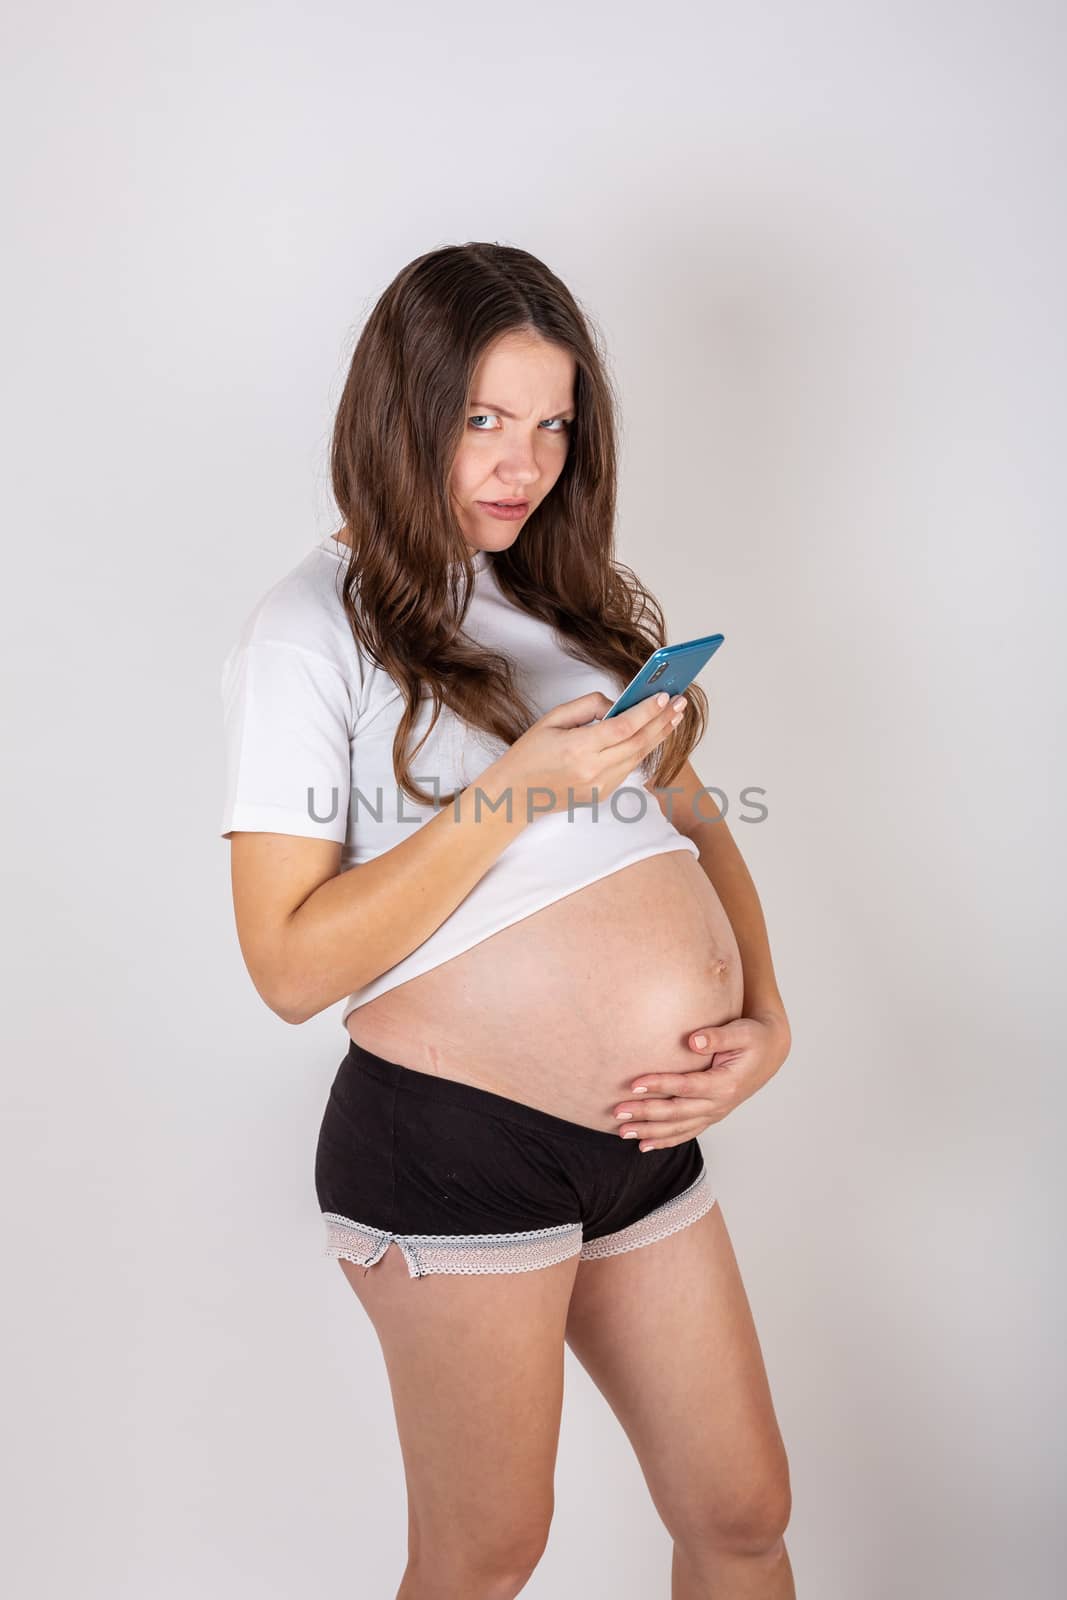 Cute pregnant woman on the phone while lying on a white background.